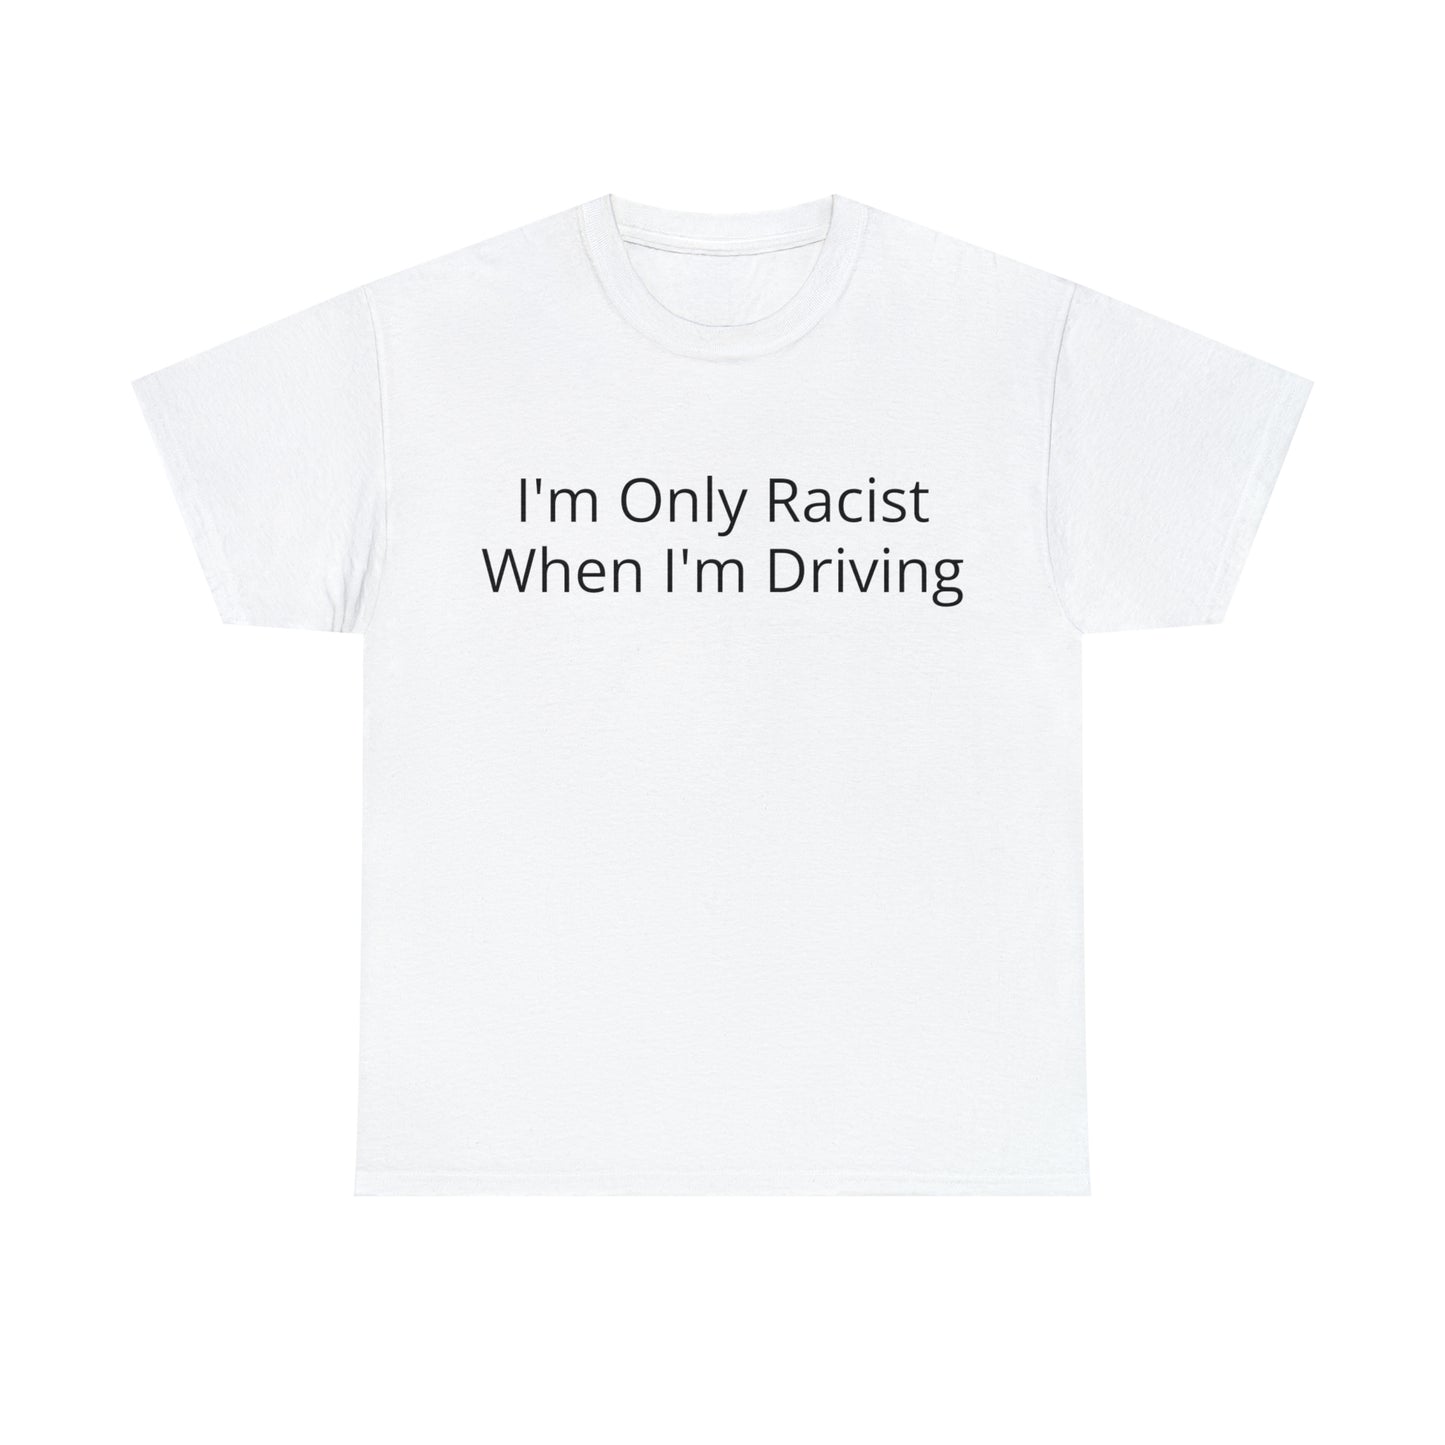 I'm Only Racist When I'm Driving